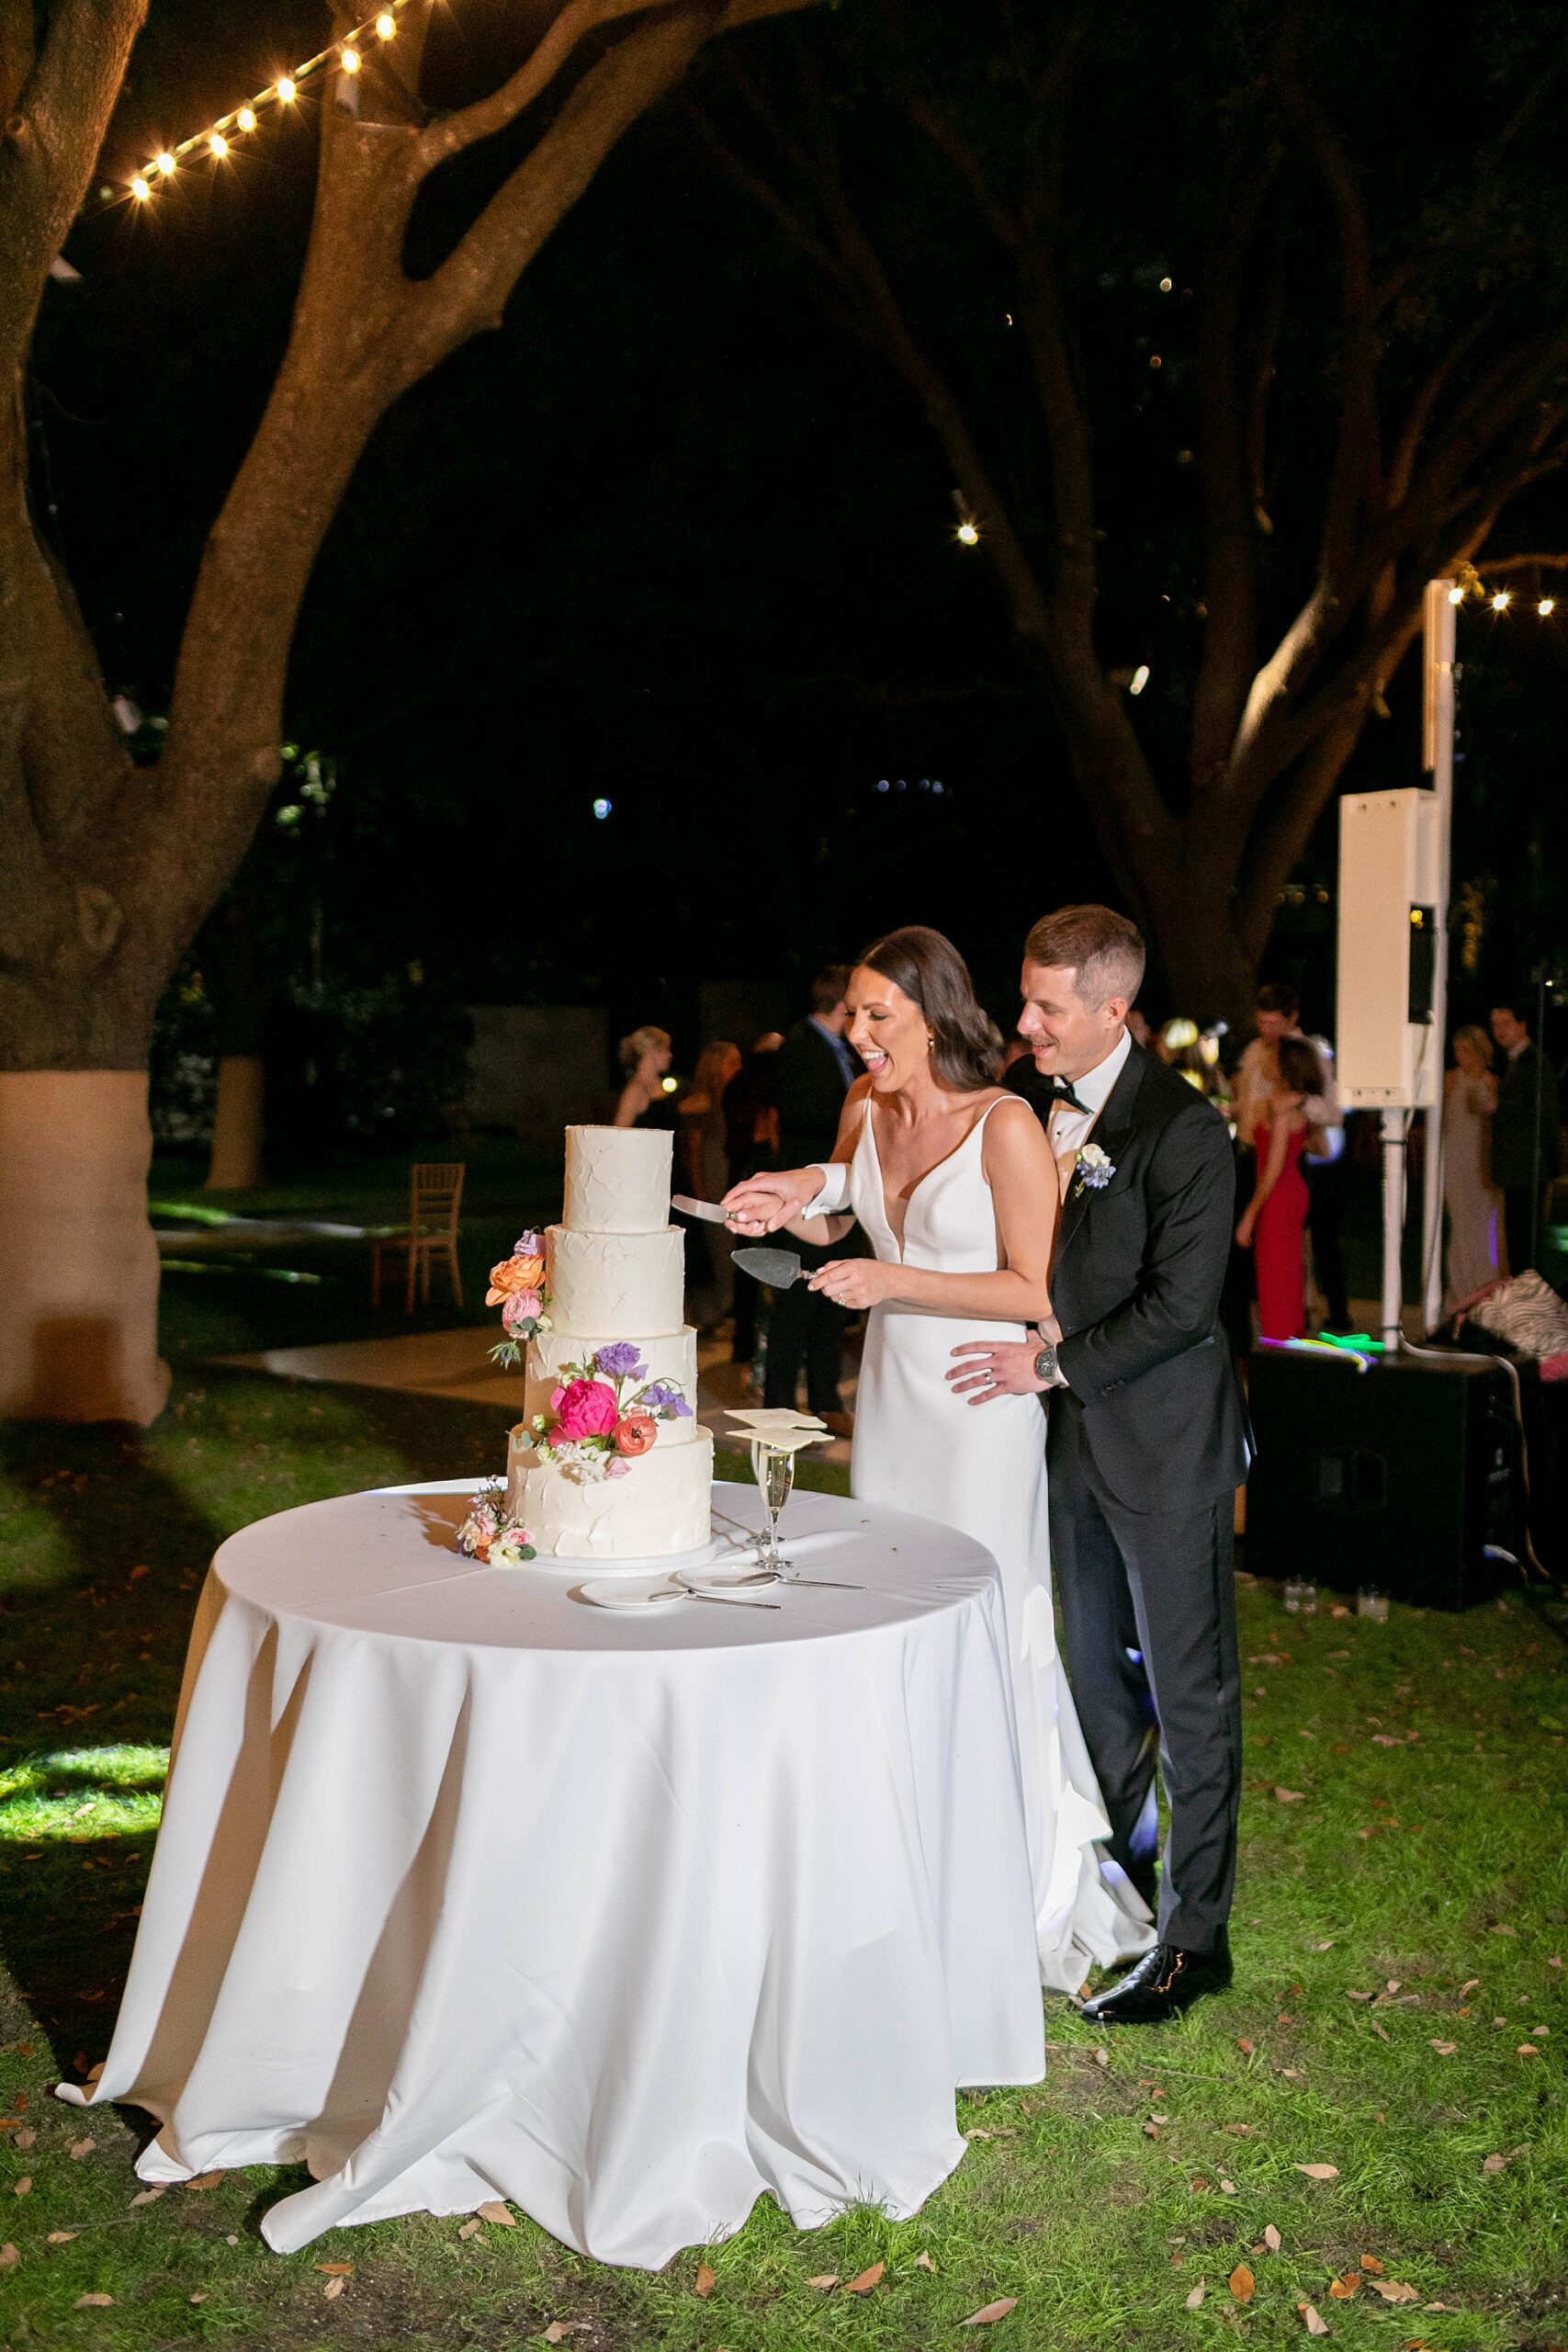 groom hugs bride from behind to cut cake during outdoor Dallas wedding reception 